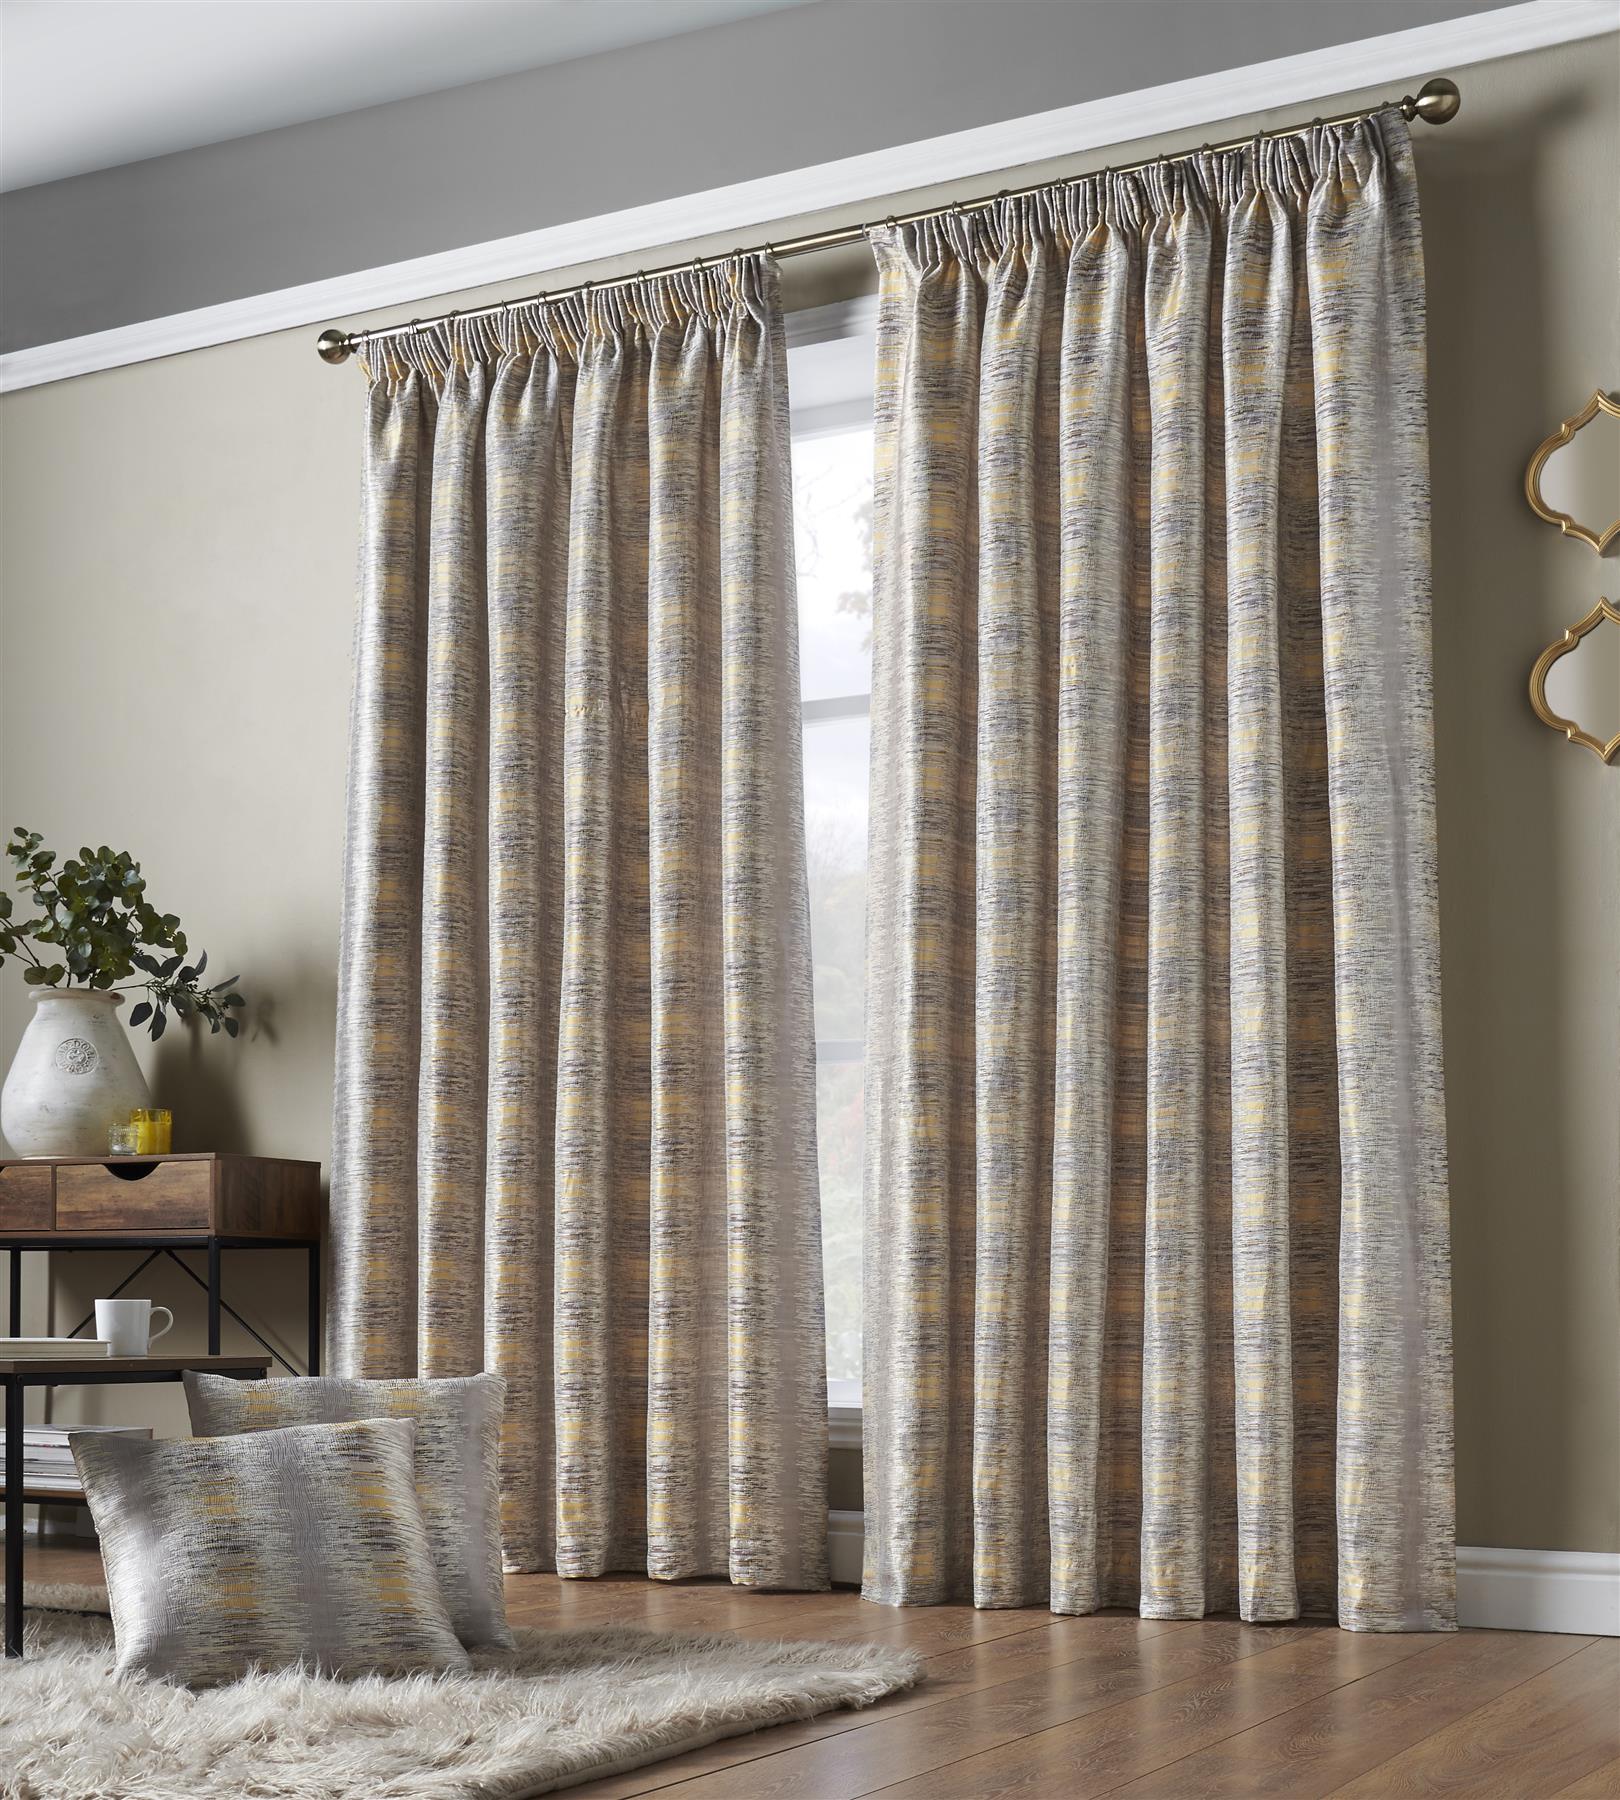 Ochre Reflection Fully Lined Pencil Pleat Curtains Pair